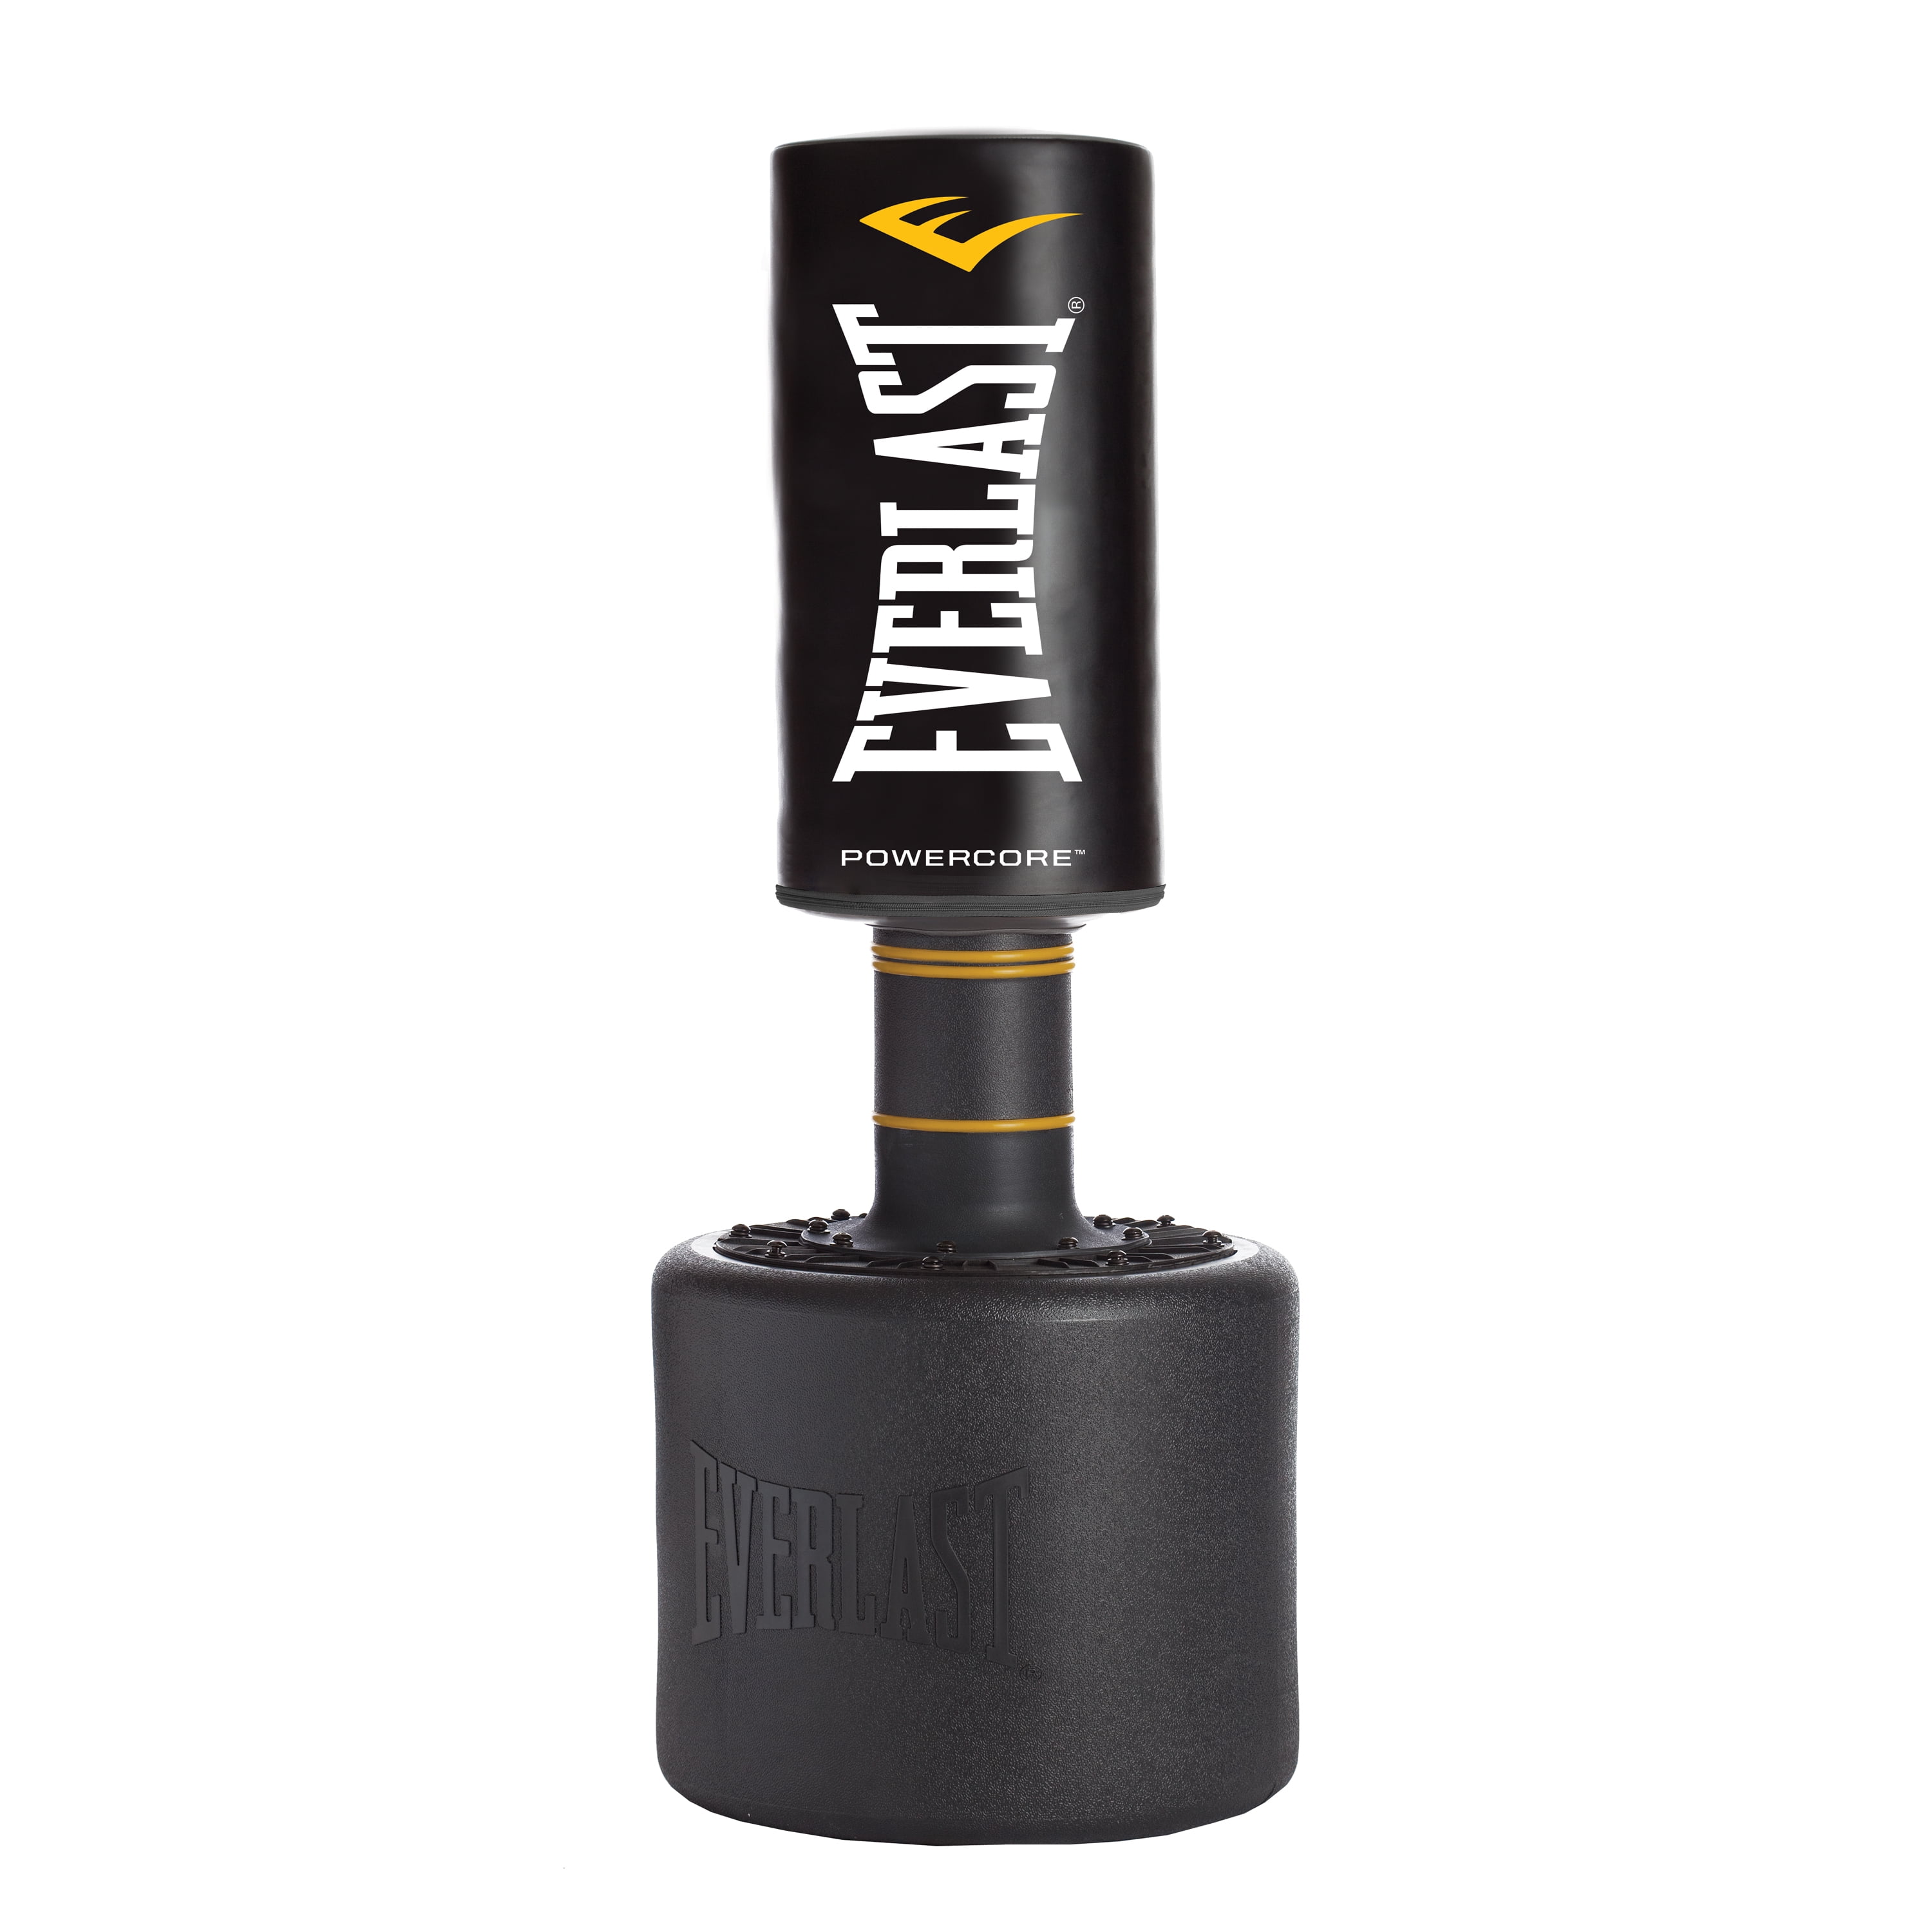 Everlast Fit Powercore Free Standing Punch Bag Accessories Plastic Base Designed 